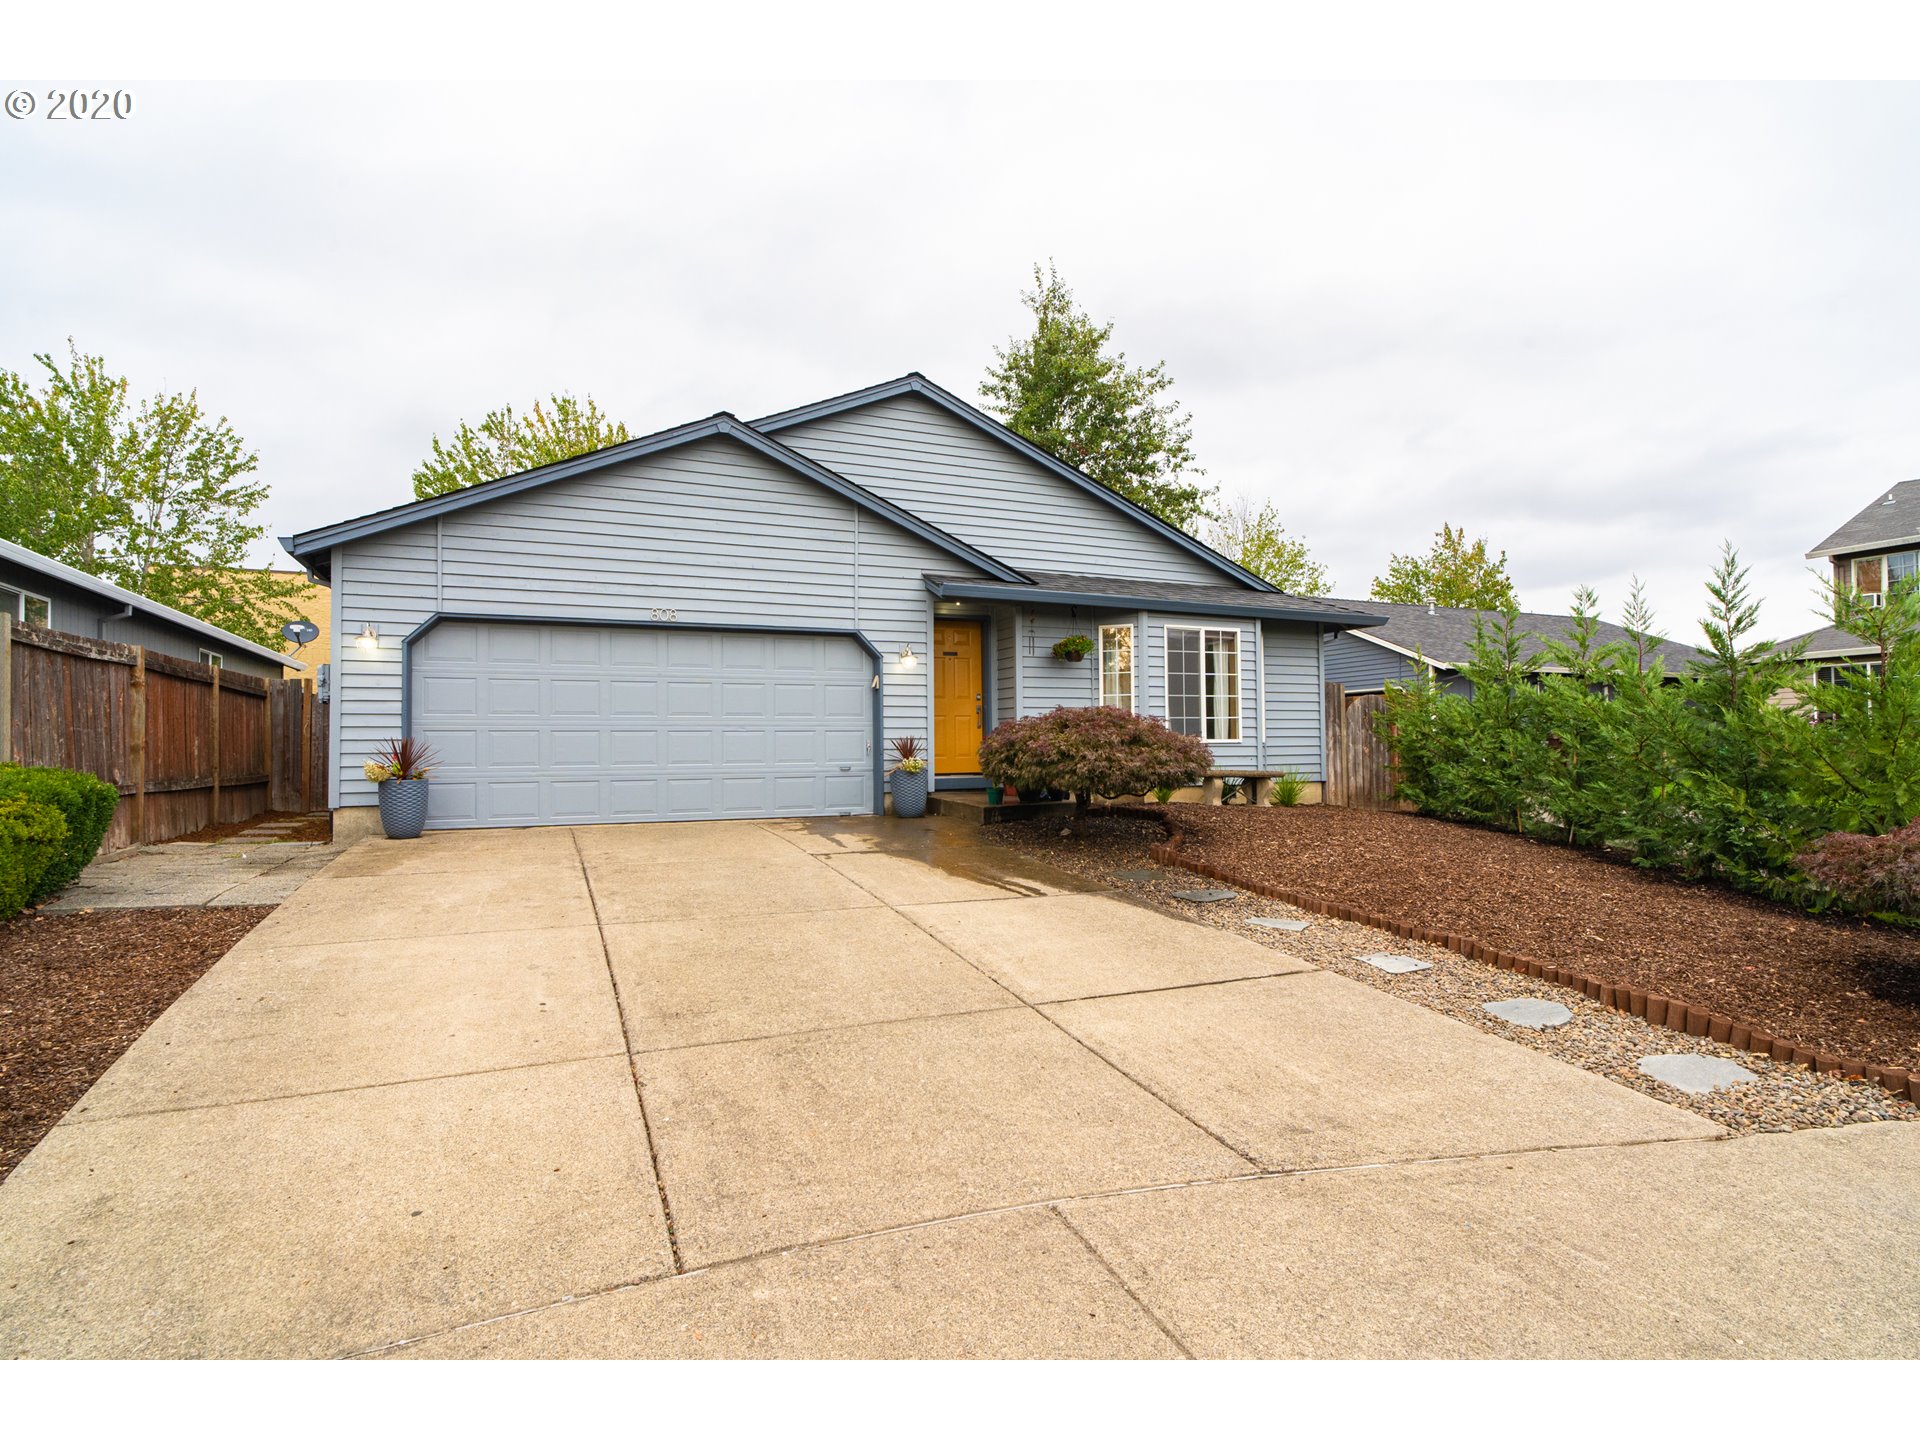 808 SE 74TH AVE (1 of 32)